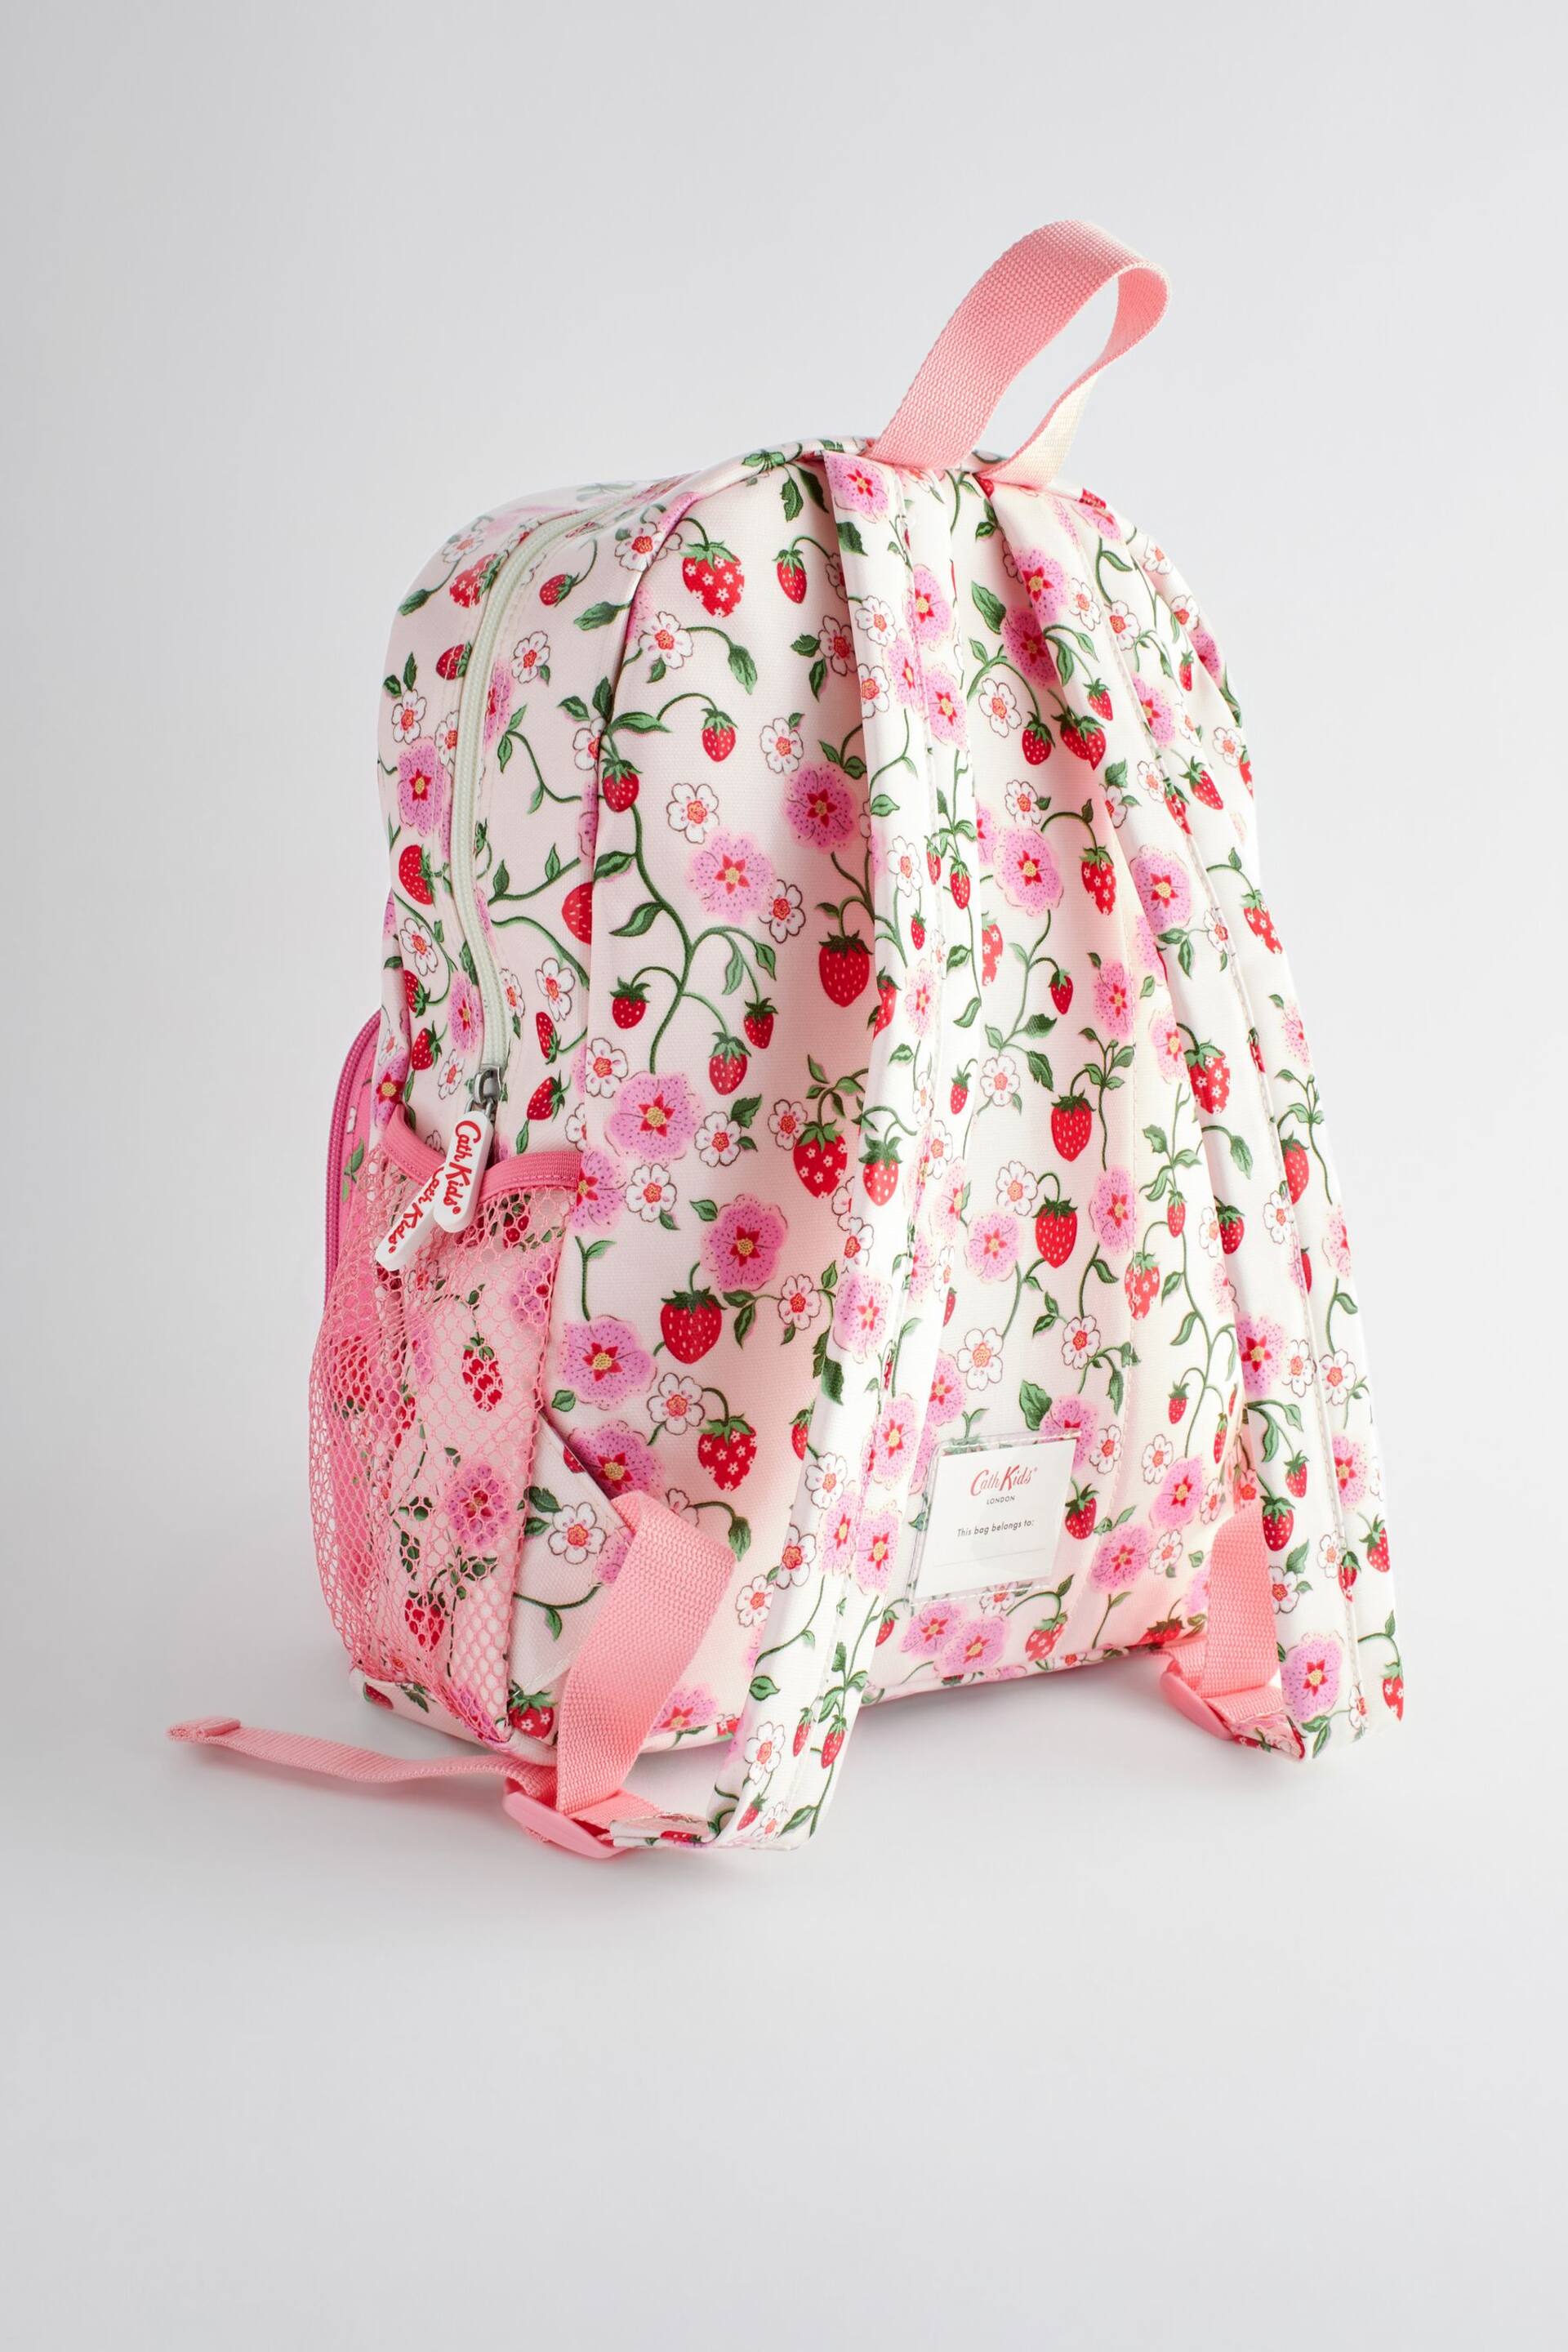 Cath Kidston Pink/White Floral Large Backpack - Image 4 of 12